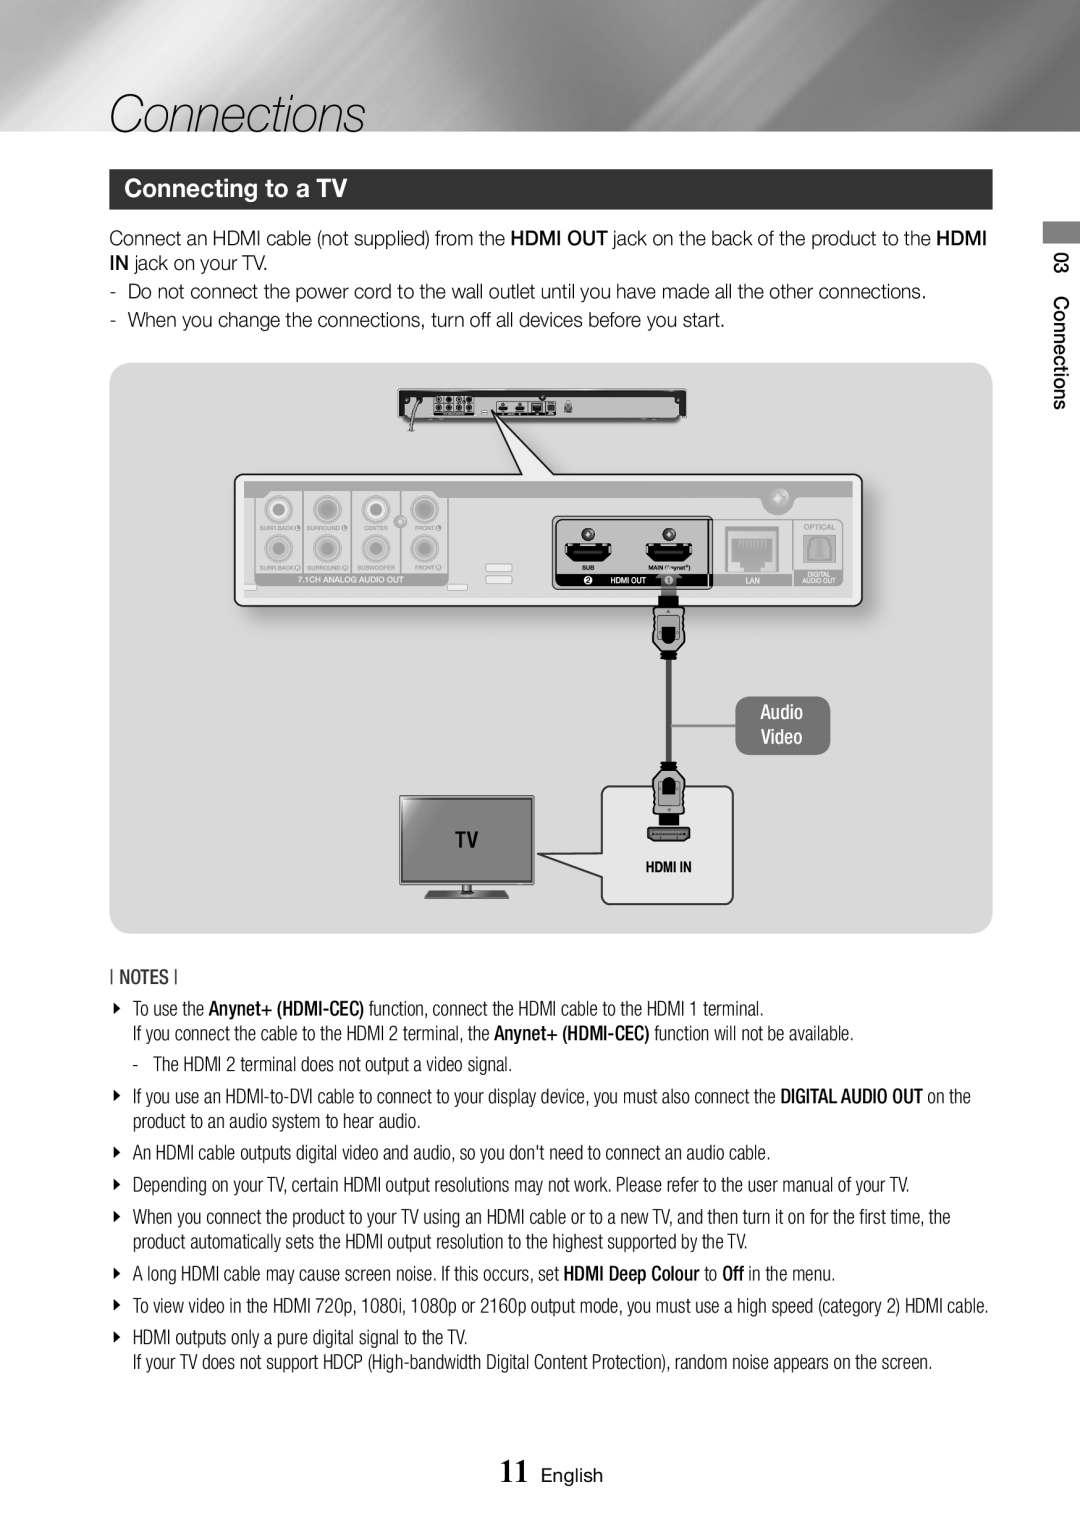 Samsung BD-J7500/EN manual Connections, Connecting to a TV, Audio Video 